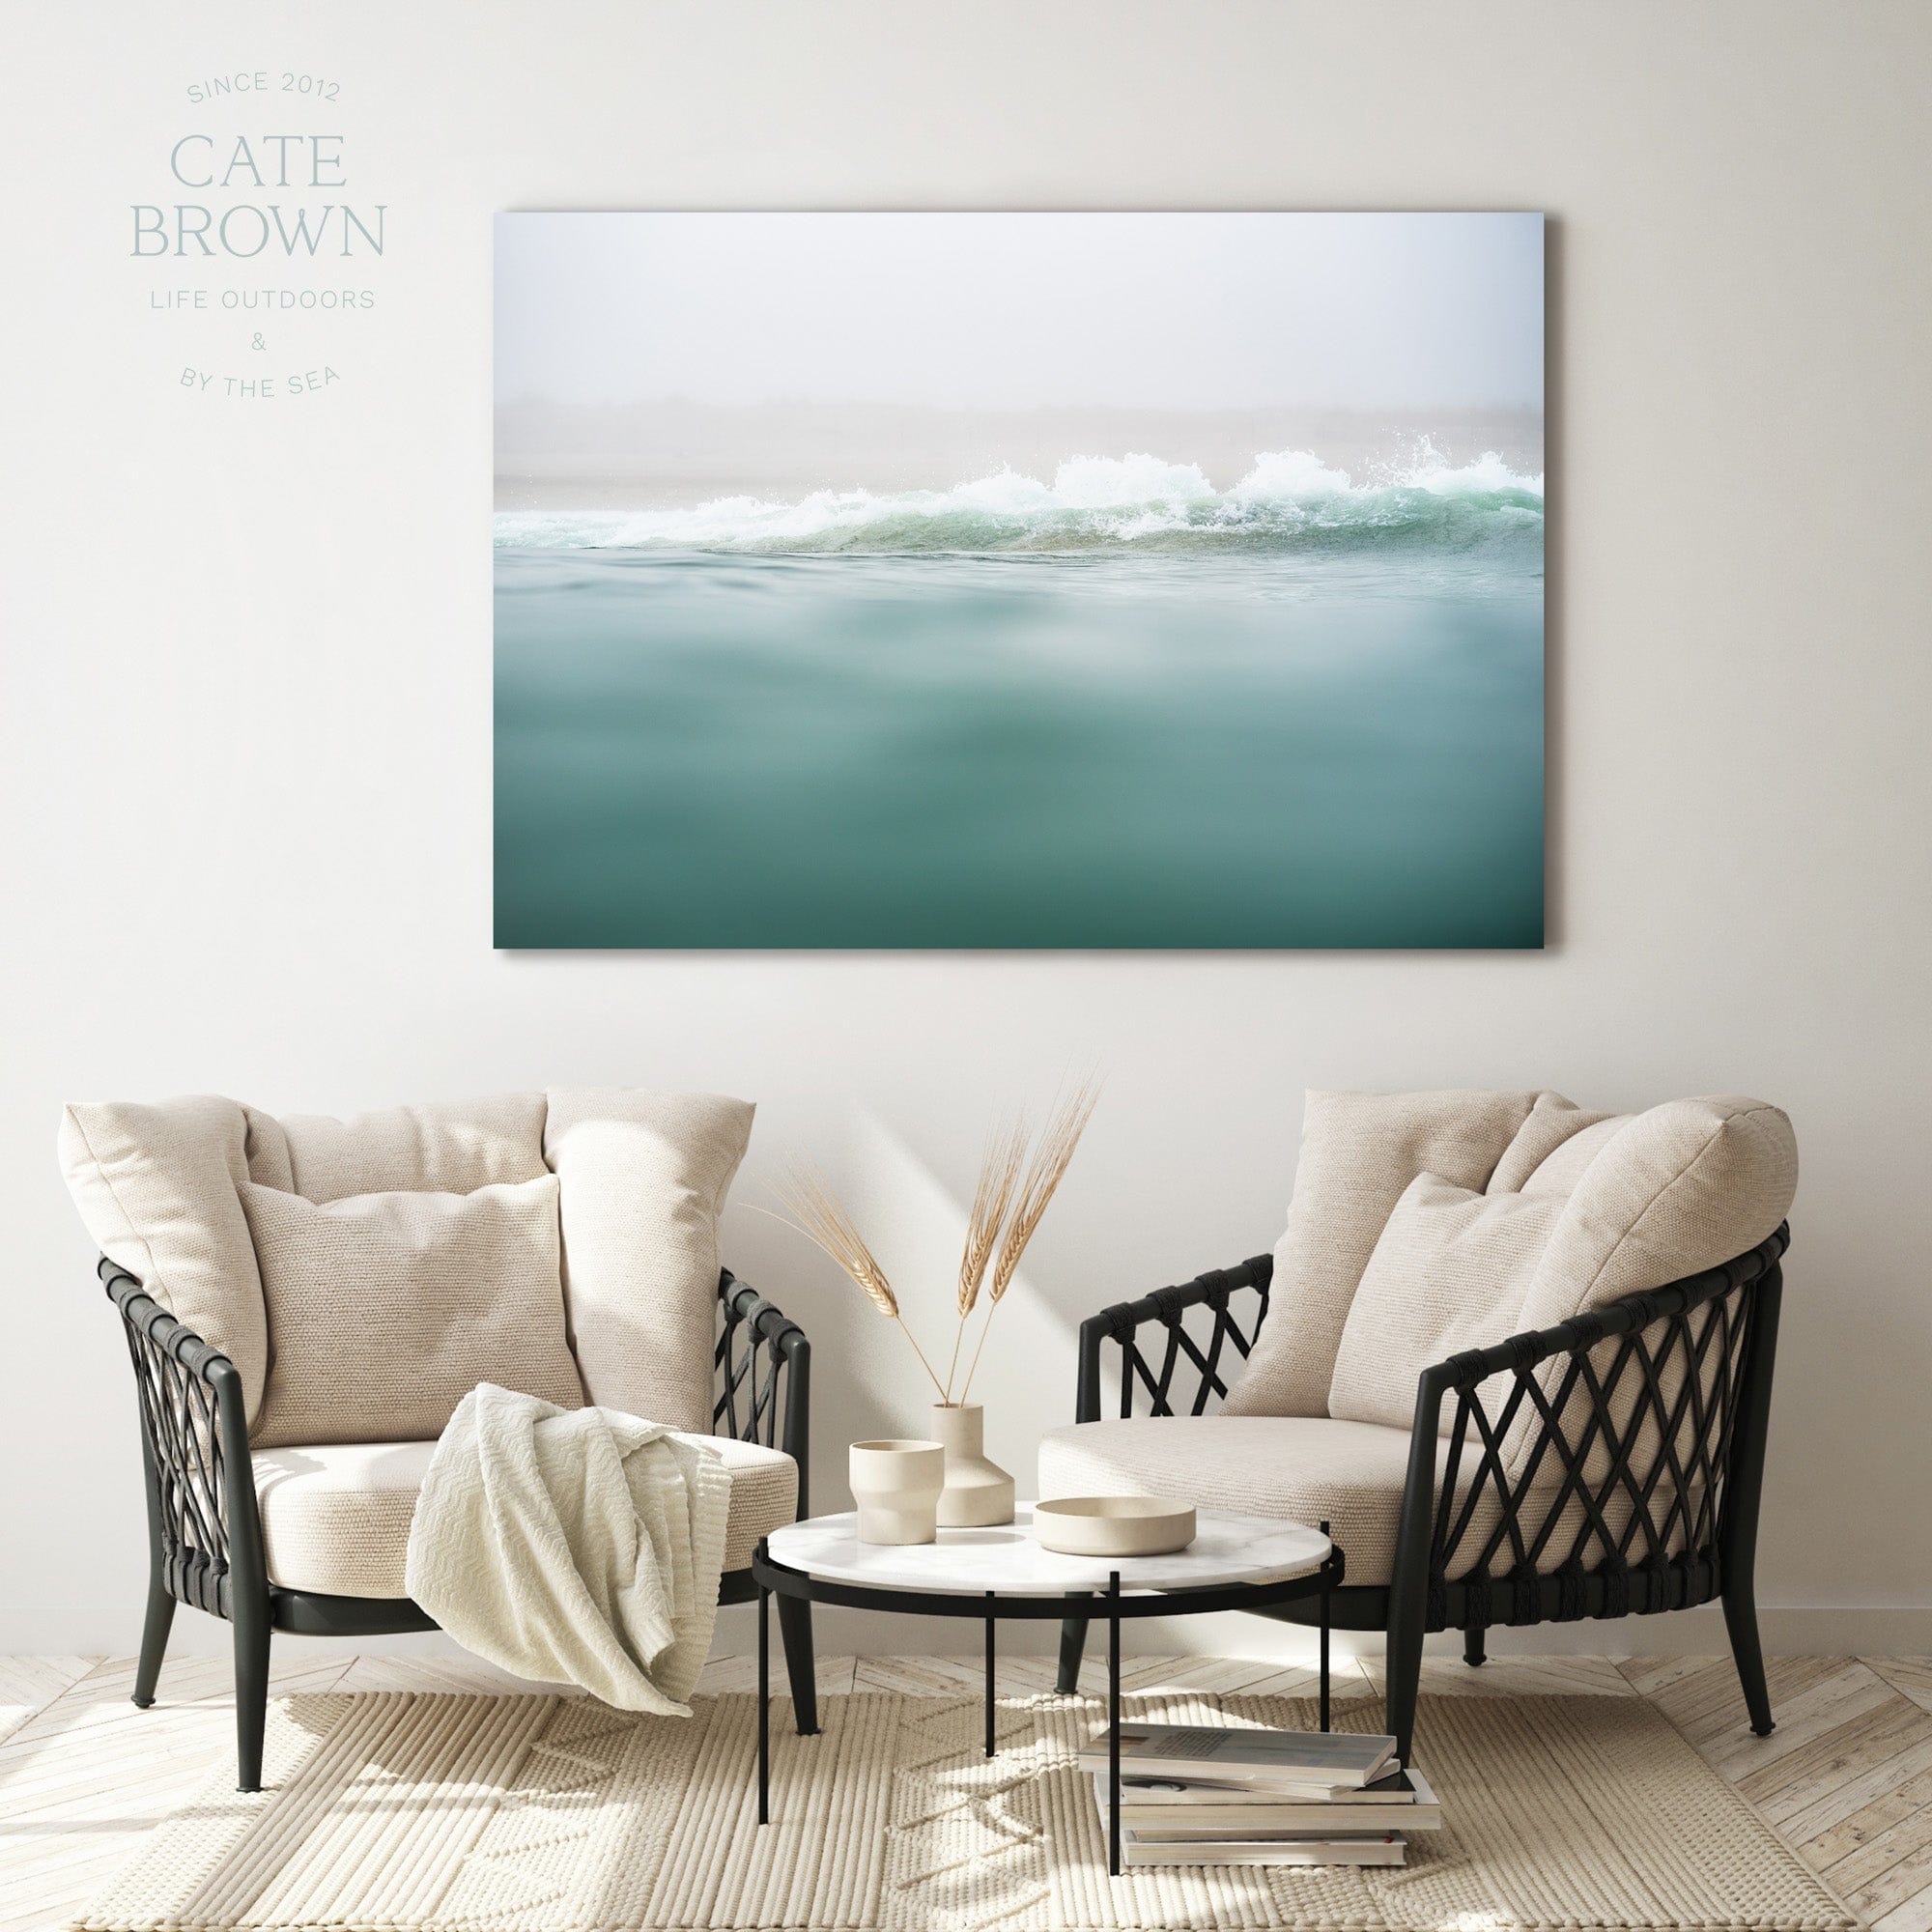 Cate Brown Photo Canvas / 16"x24" / None (Print Only) Misty Shorelines  //  Ocean Photography Made to Order Ocean Fine Art